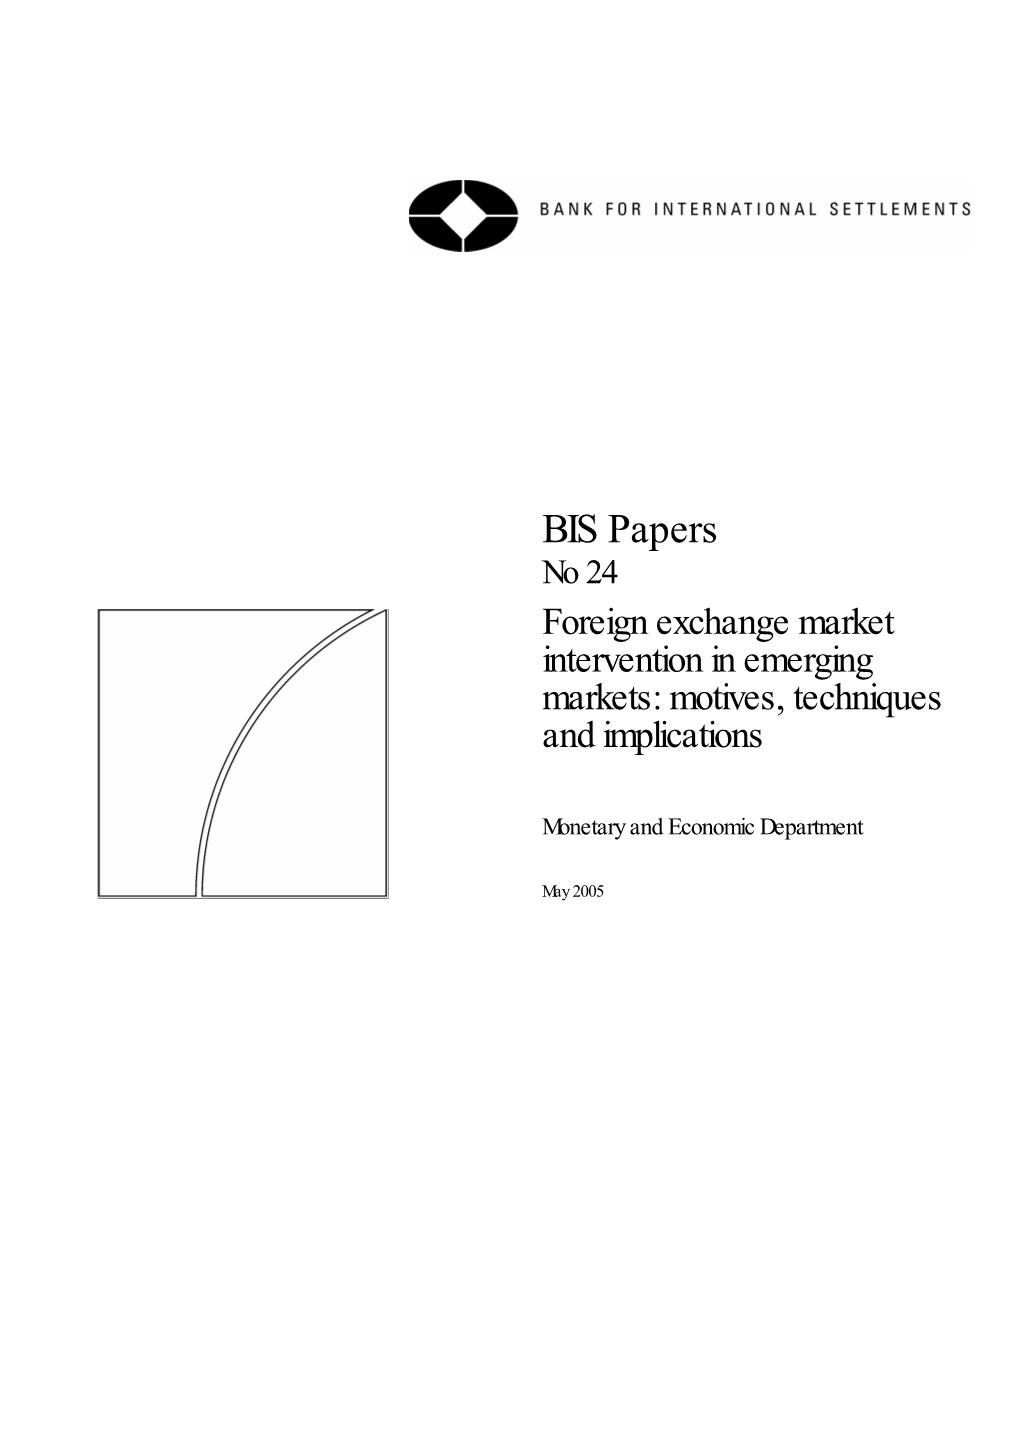 BIS Papers No 24: Foreign Exchange Market Intervention in Emerging